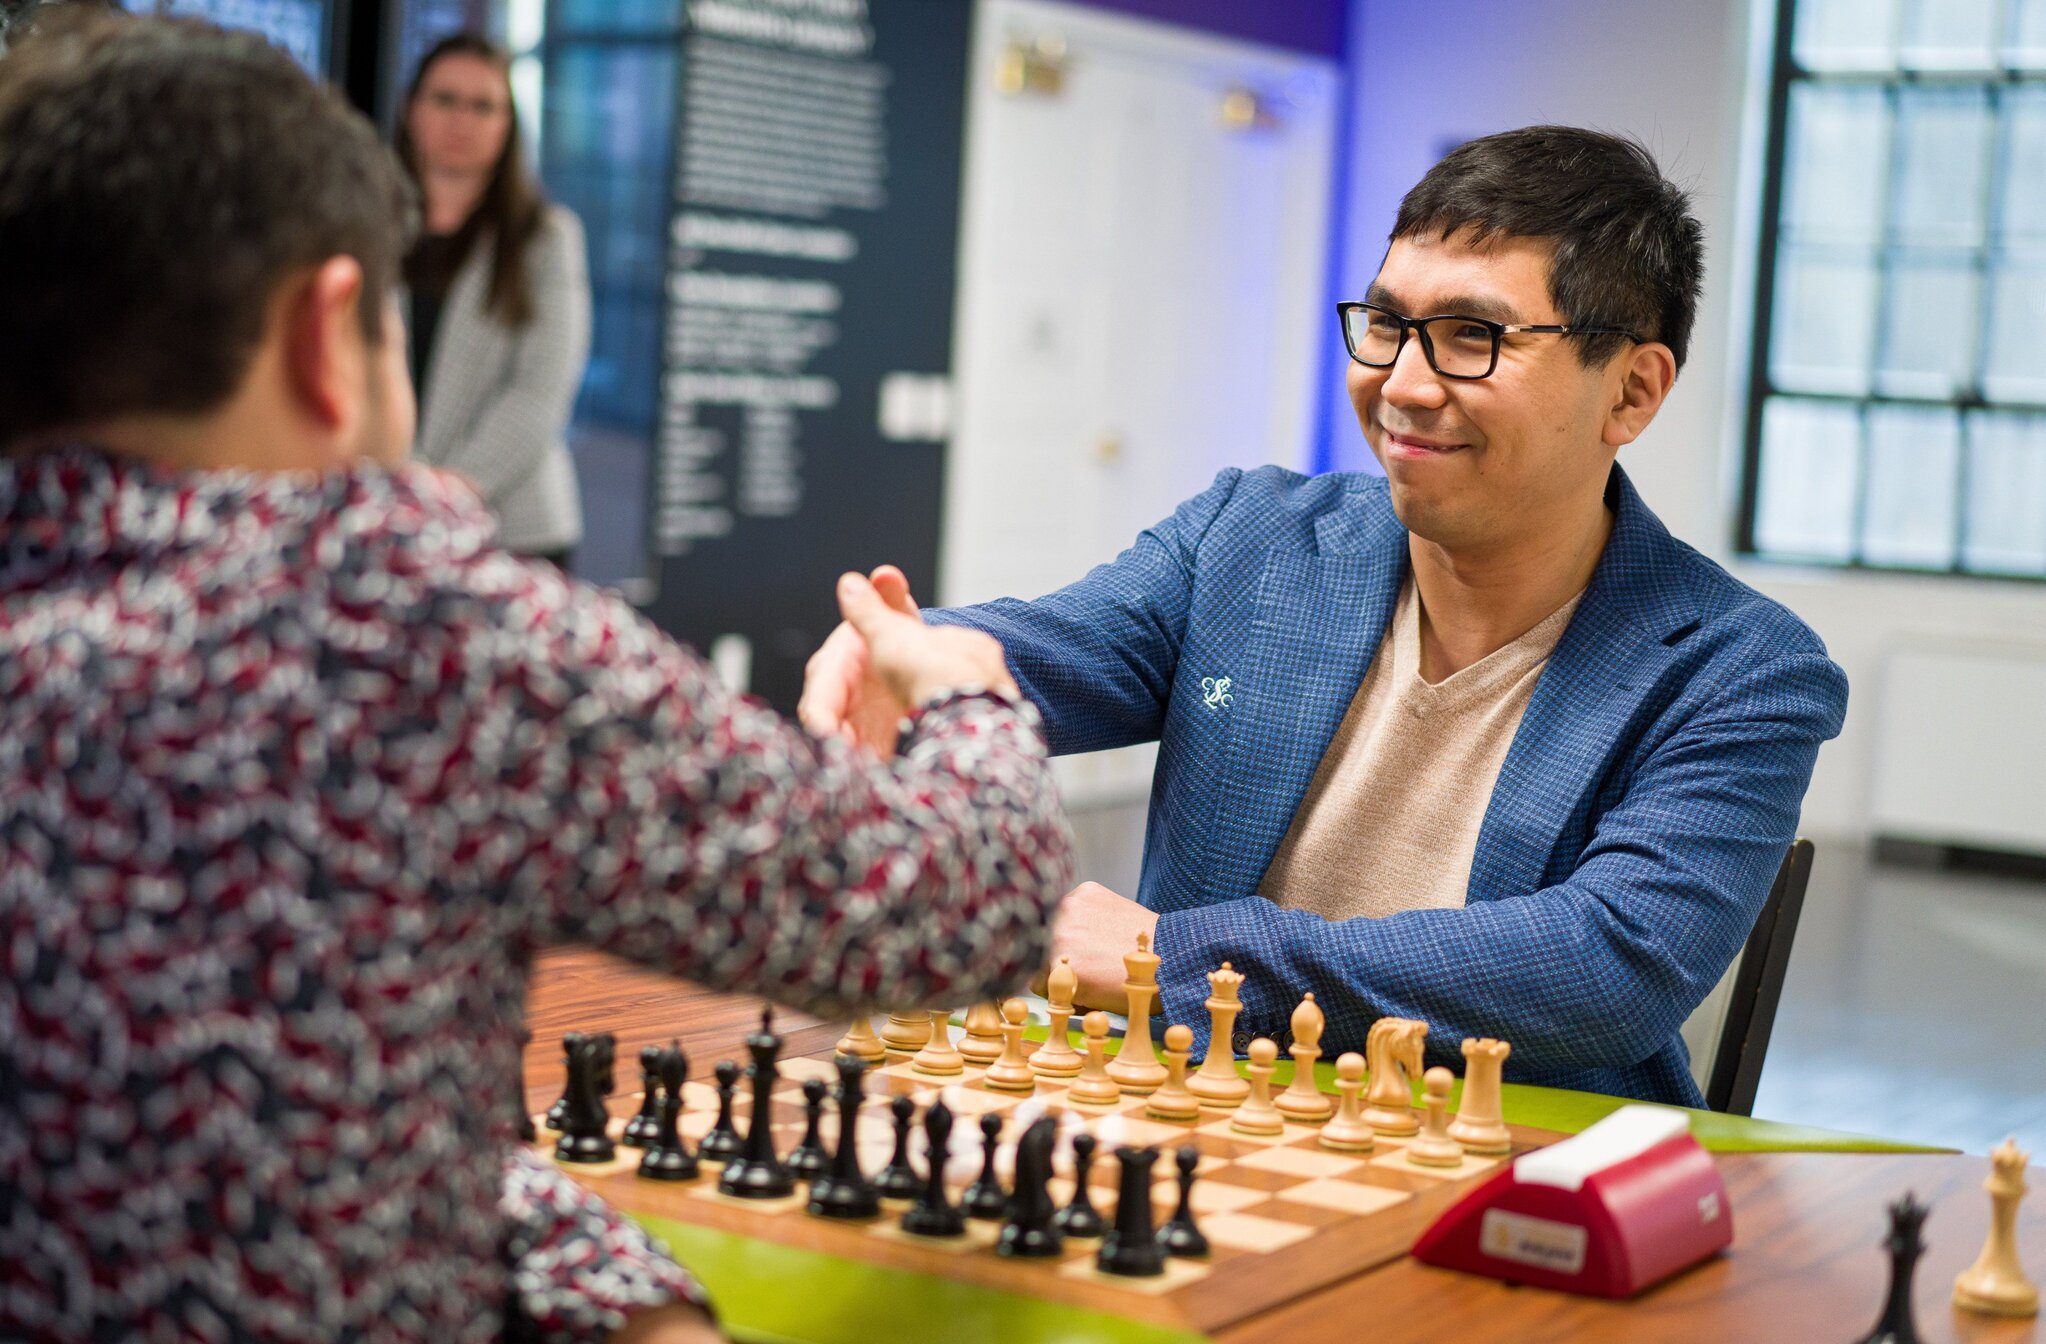 Hikaru cements his place as the top American and World number 5 in  Classical after the American Cup with a live rating of 2775! : r/chess